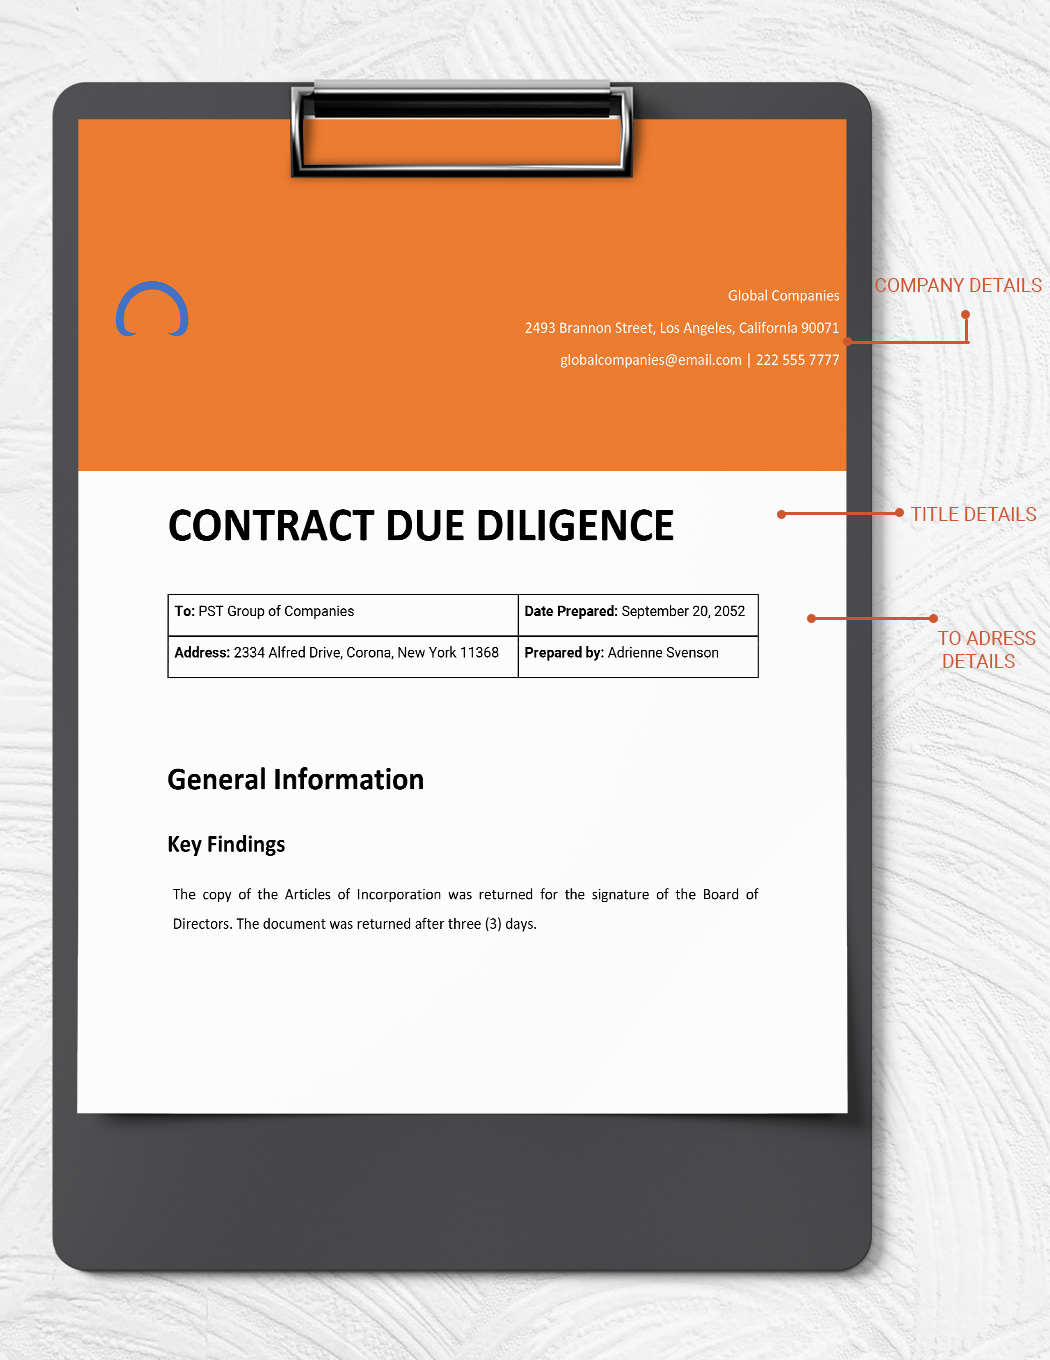 Contract Due Diligence